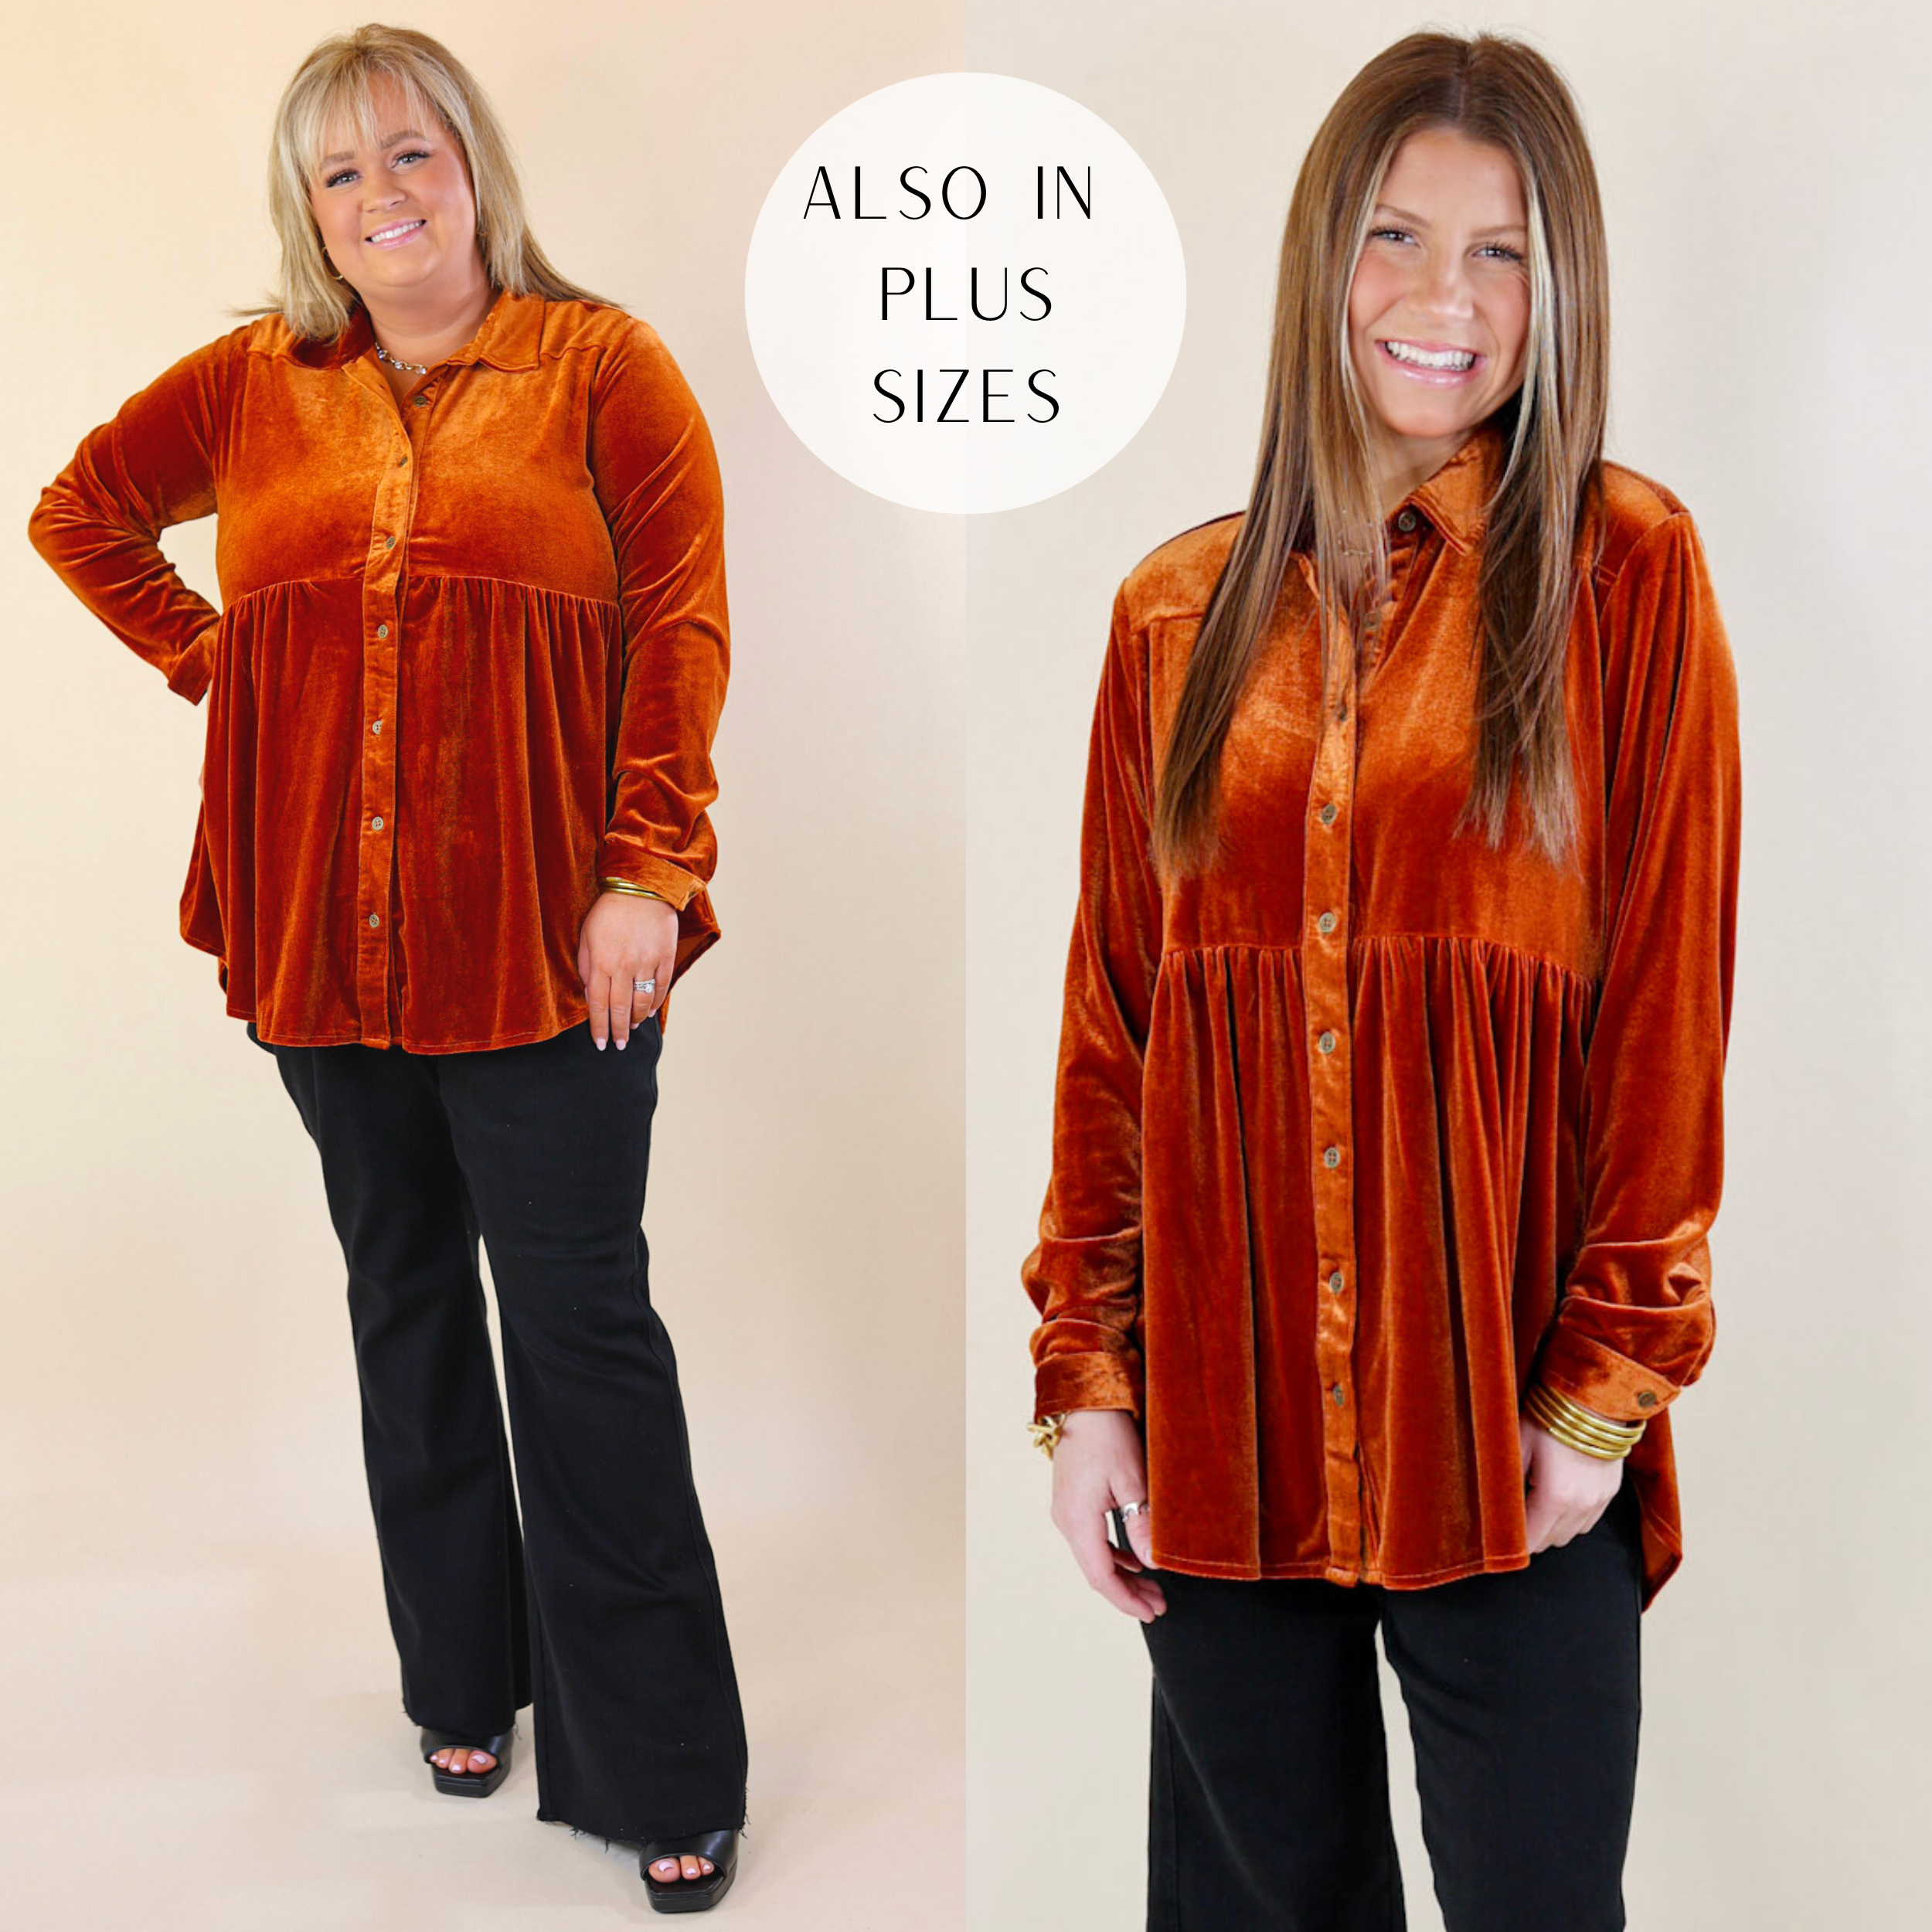 in the picture the model is wearing a button up velvet long sleeve babydoll tunic top in orange with a white background